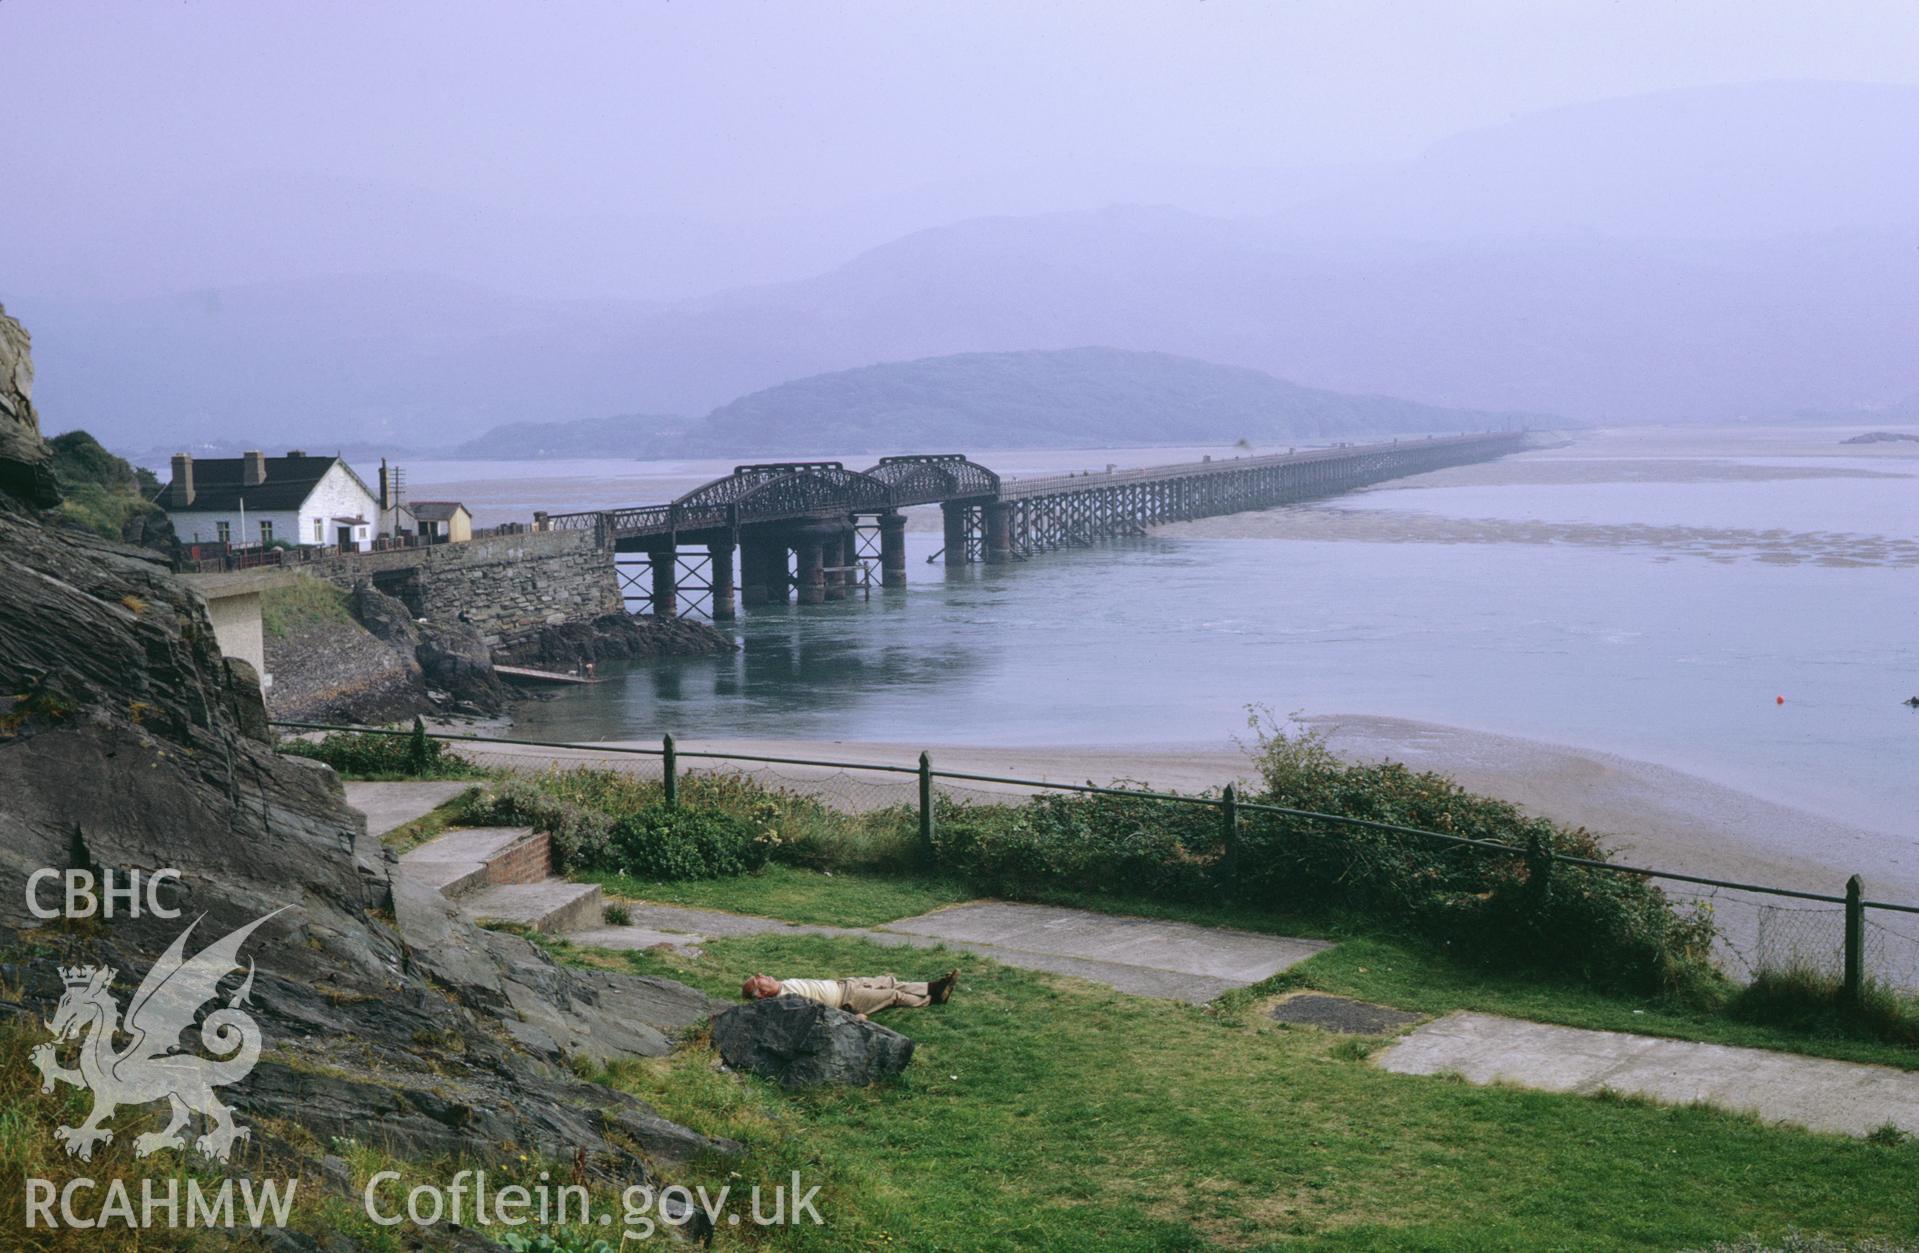 35mm colour slide showing Barmouth Estuary Railway Bridge, Merionethshire by Dylan Roberts.